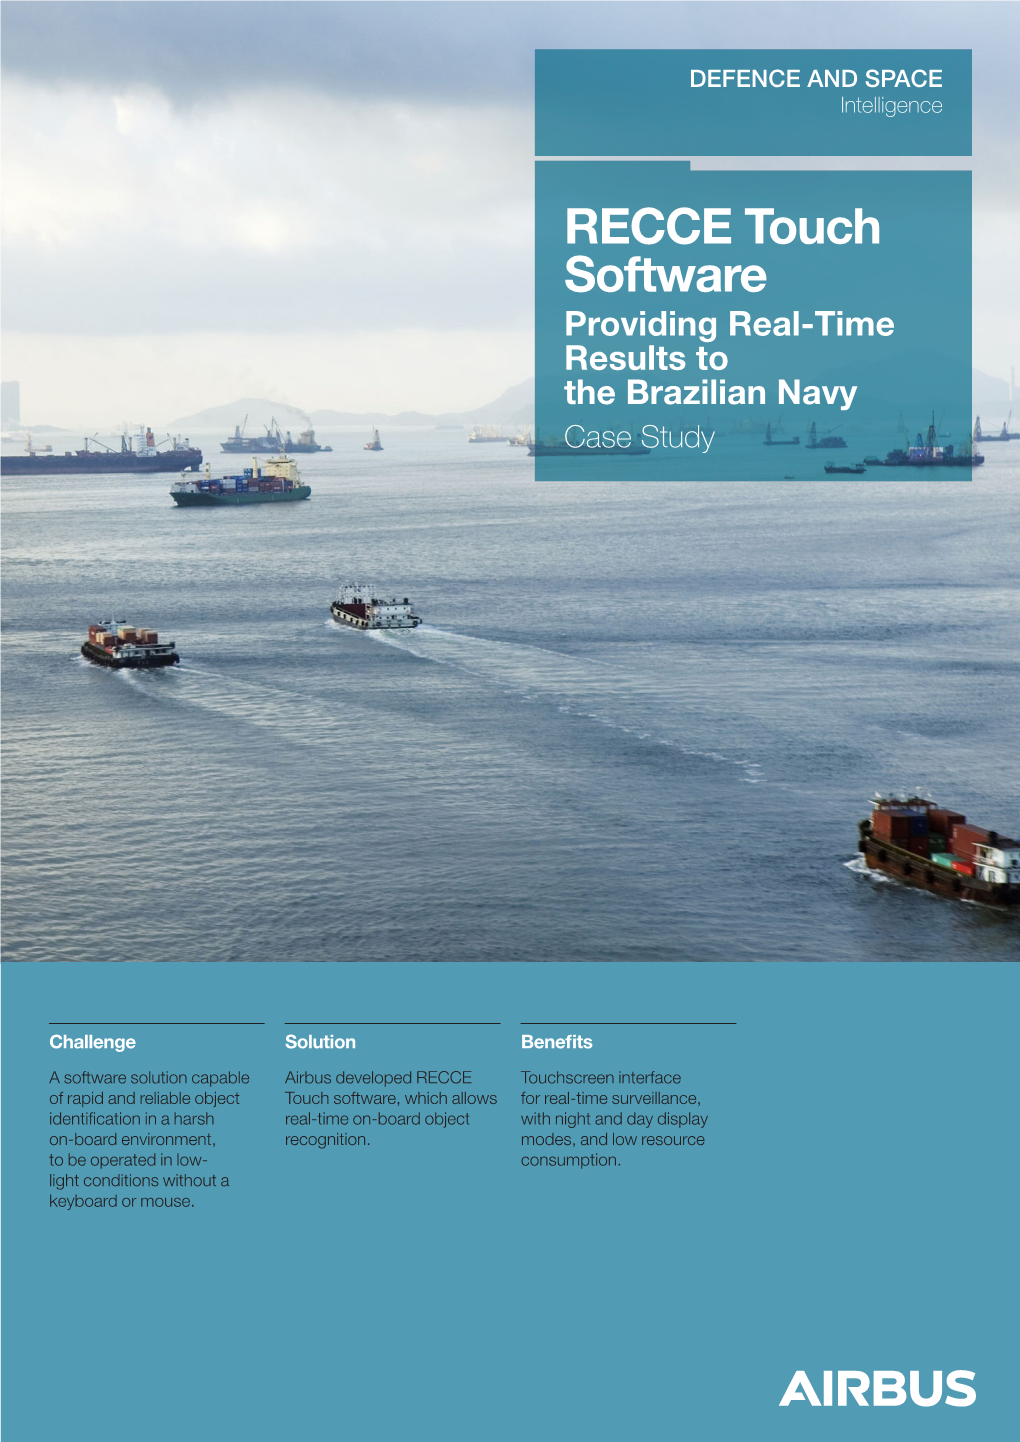 RECCE Touch Software Providing Real-Time Results to the Brazilian Navy Case Study